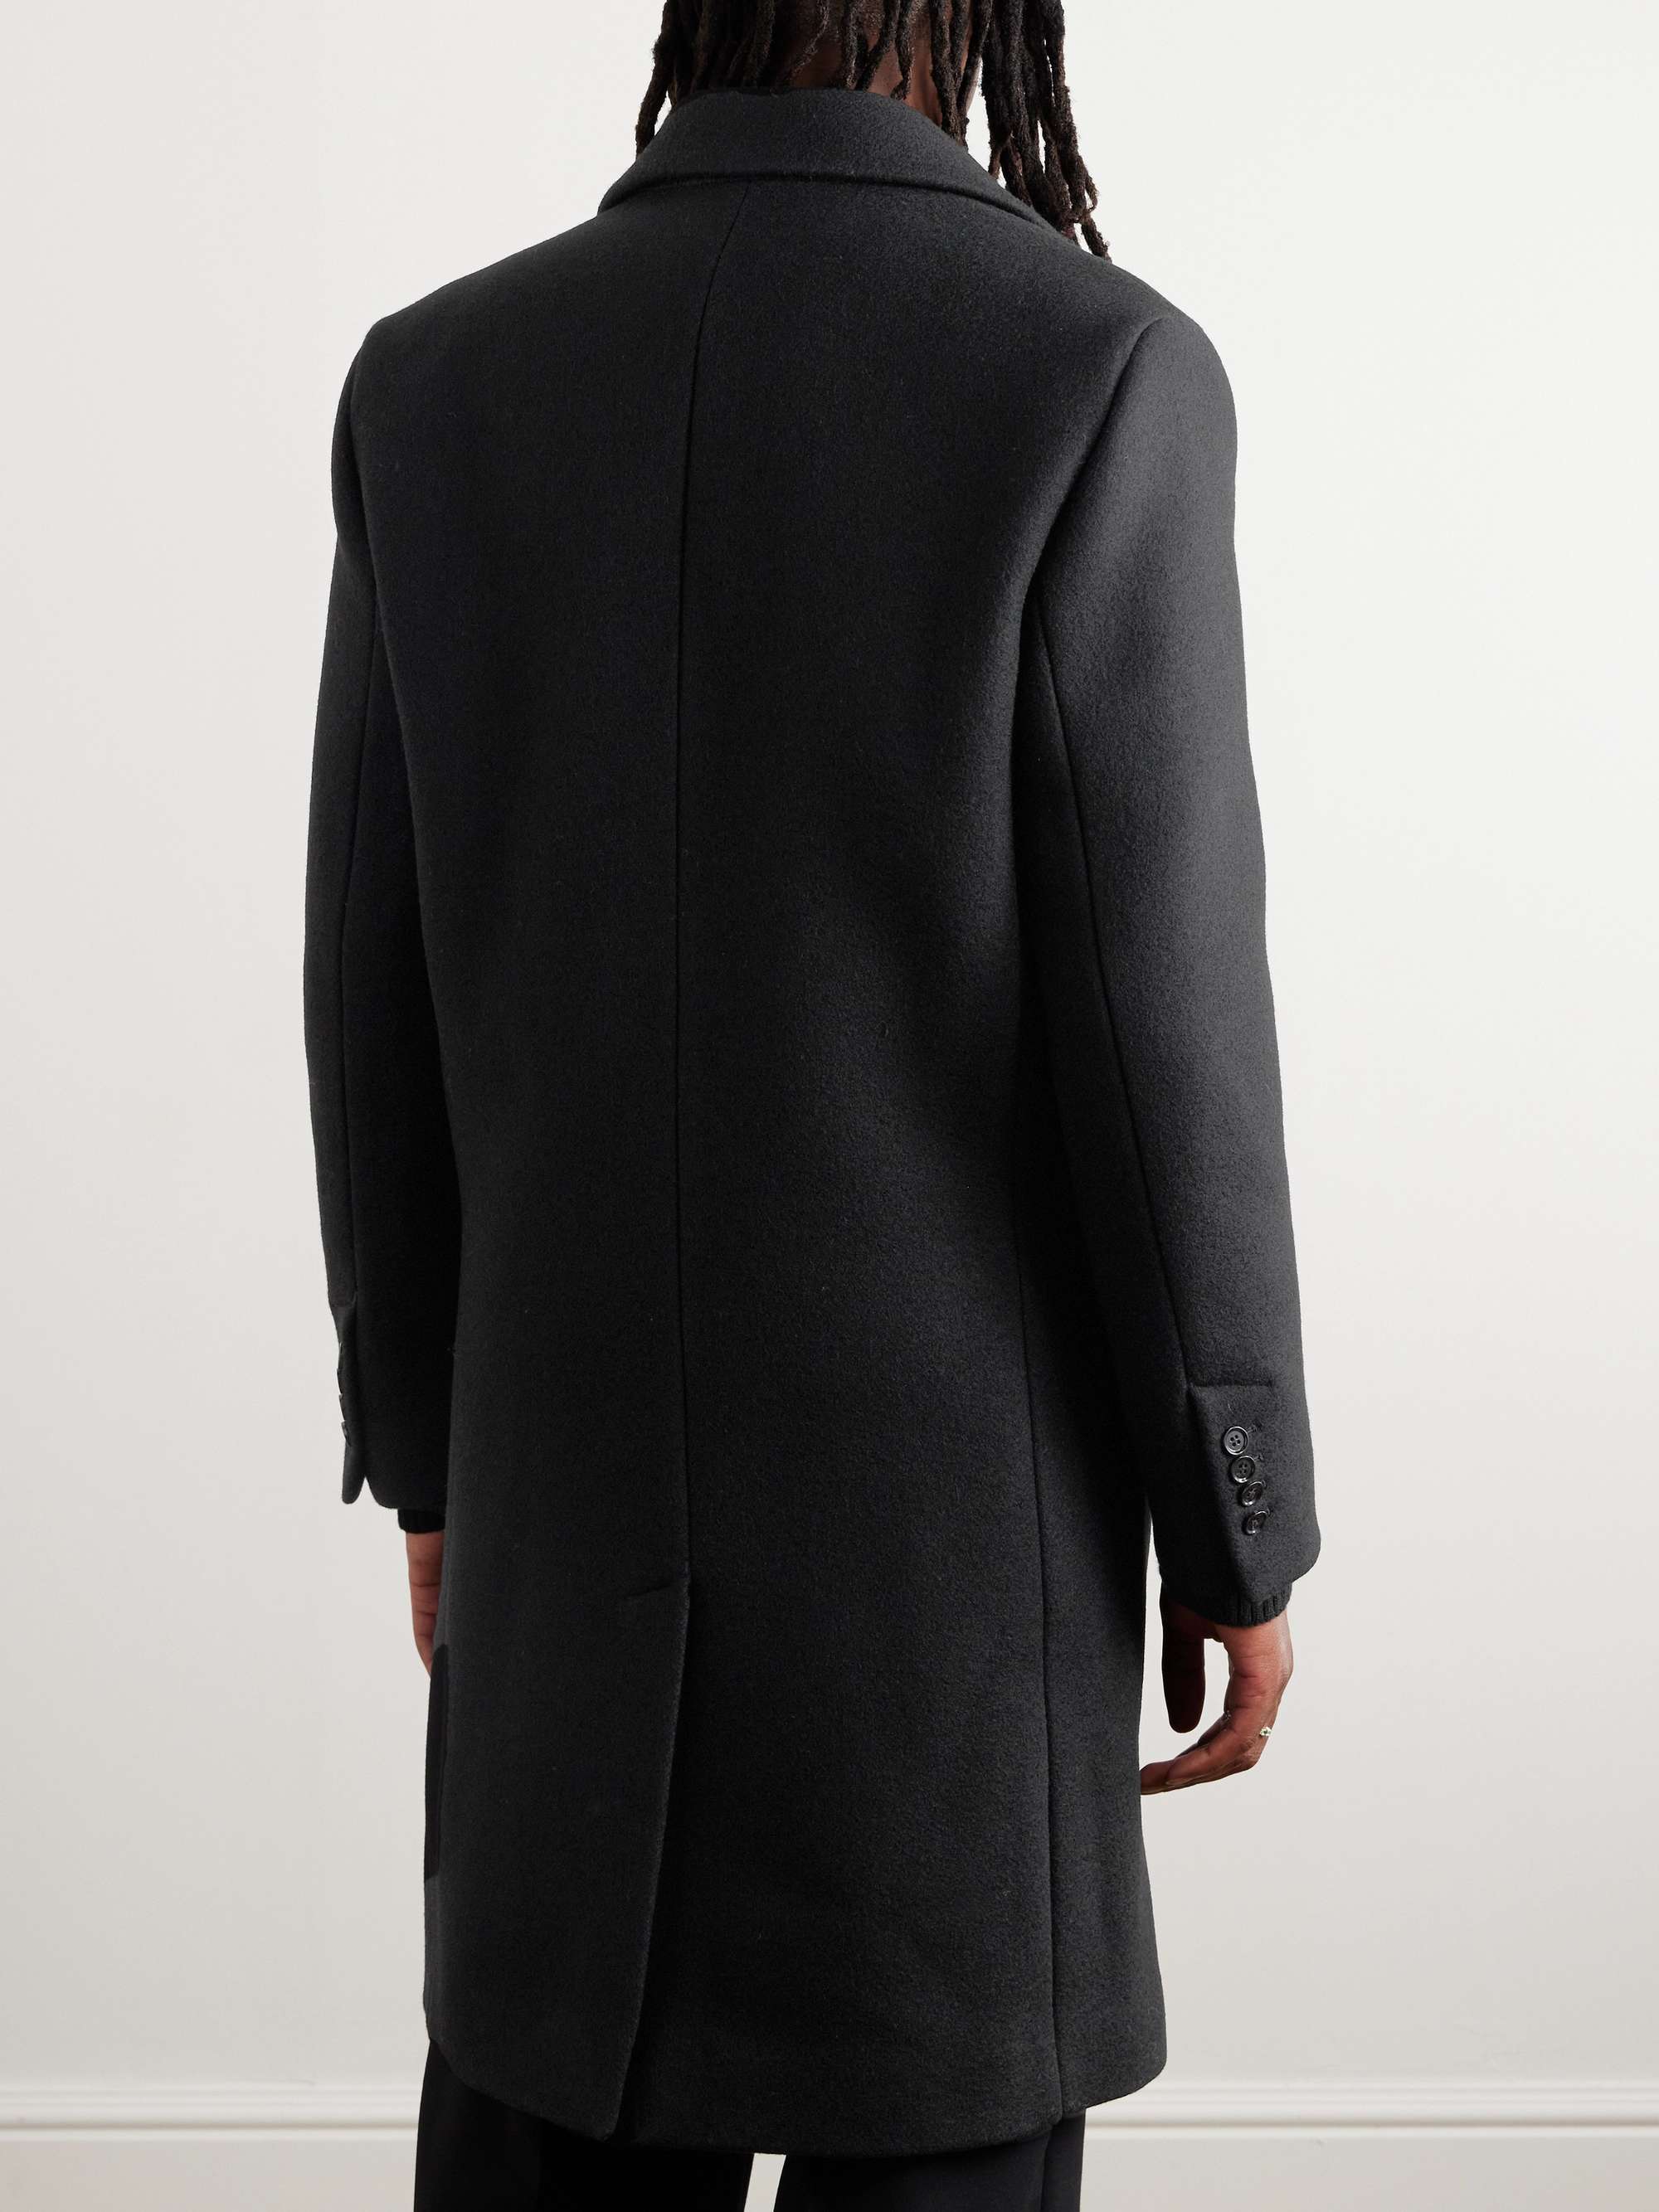 AMI PARIS Double-Breasted Wool Coat for Men | MR PORTER